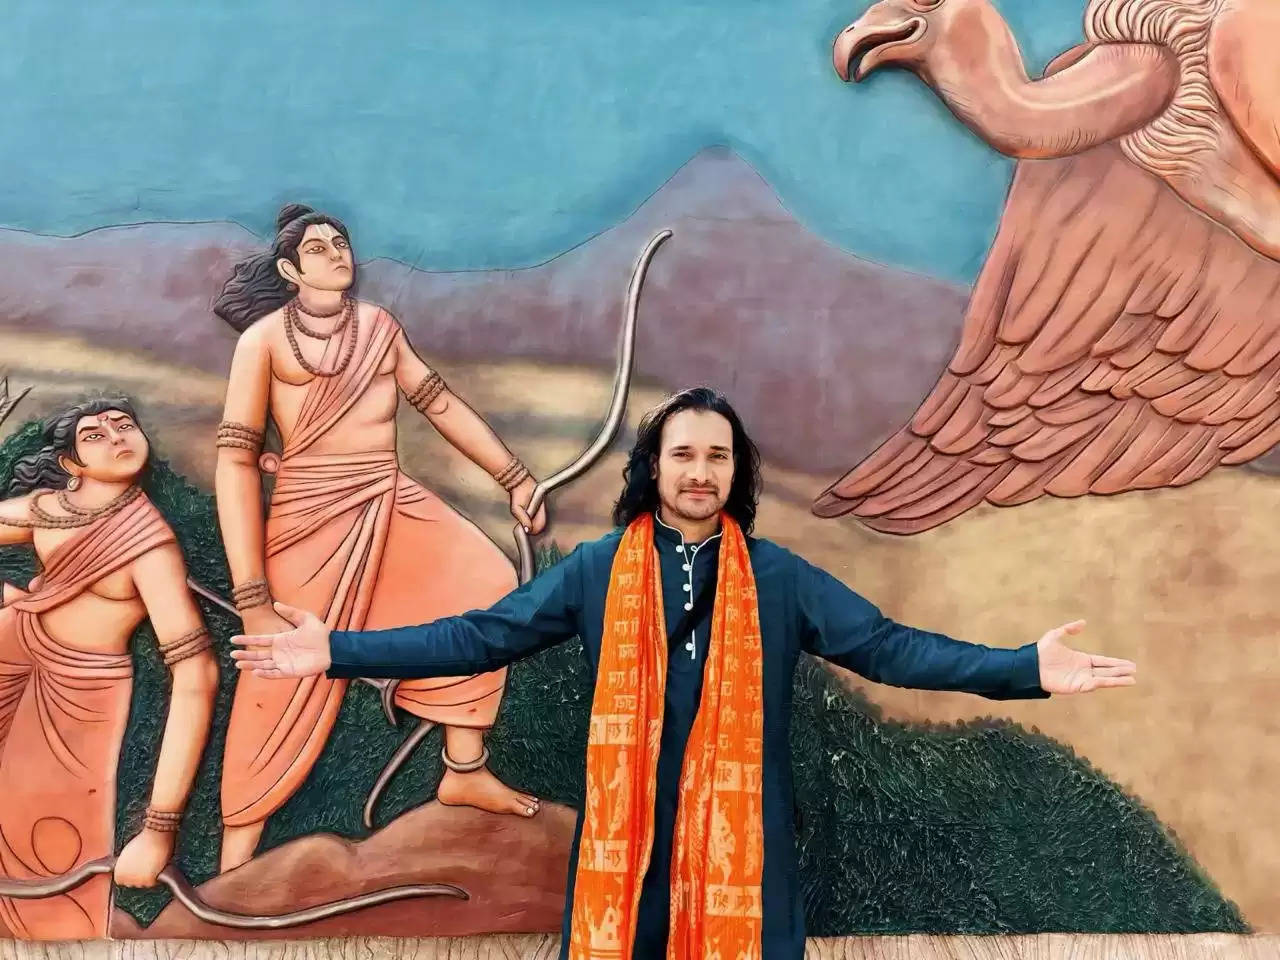 Actor Arun Mandola, who is known for his portrayal of Laxmana on television, shares his experience on a recent trip to Ayodhya.